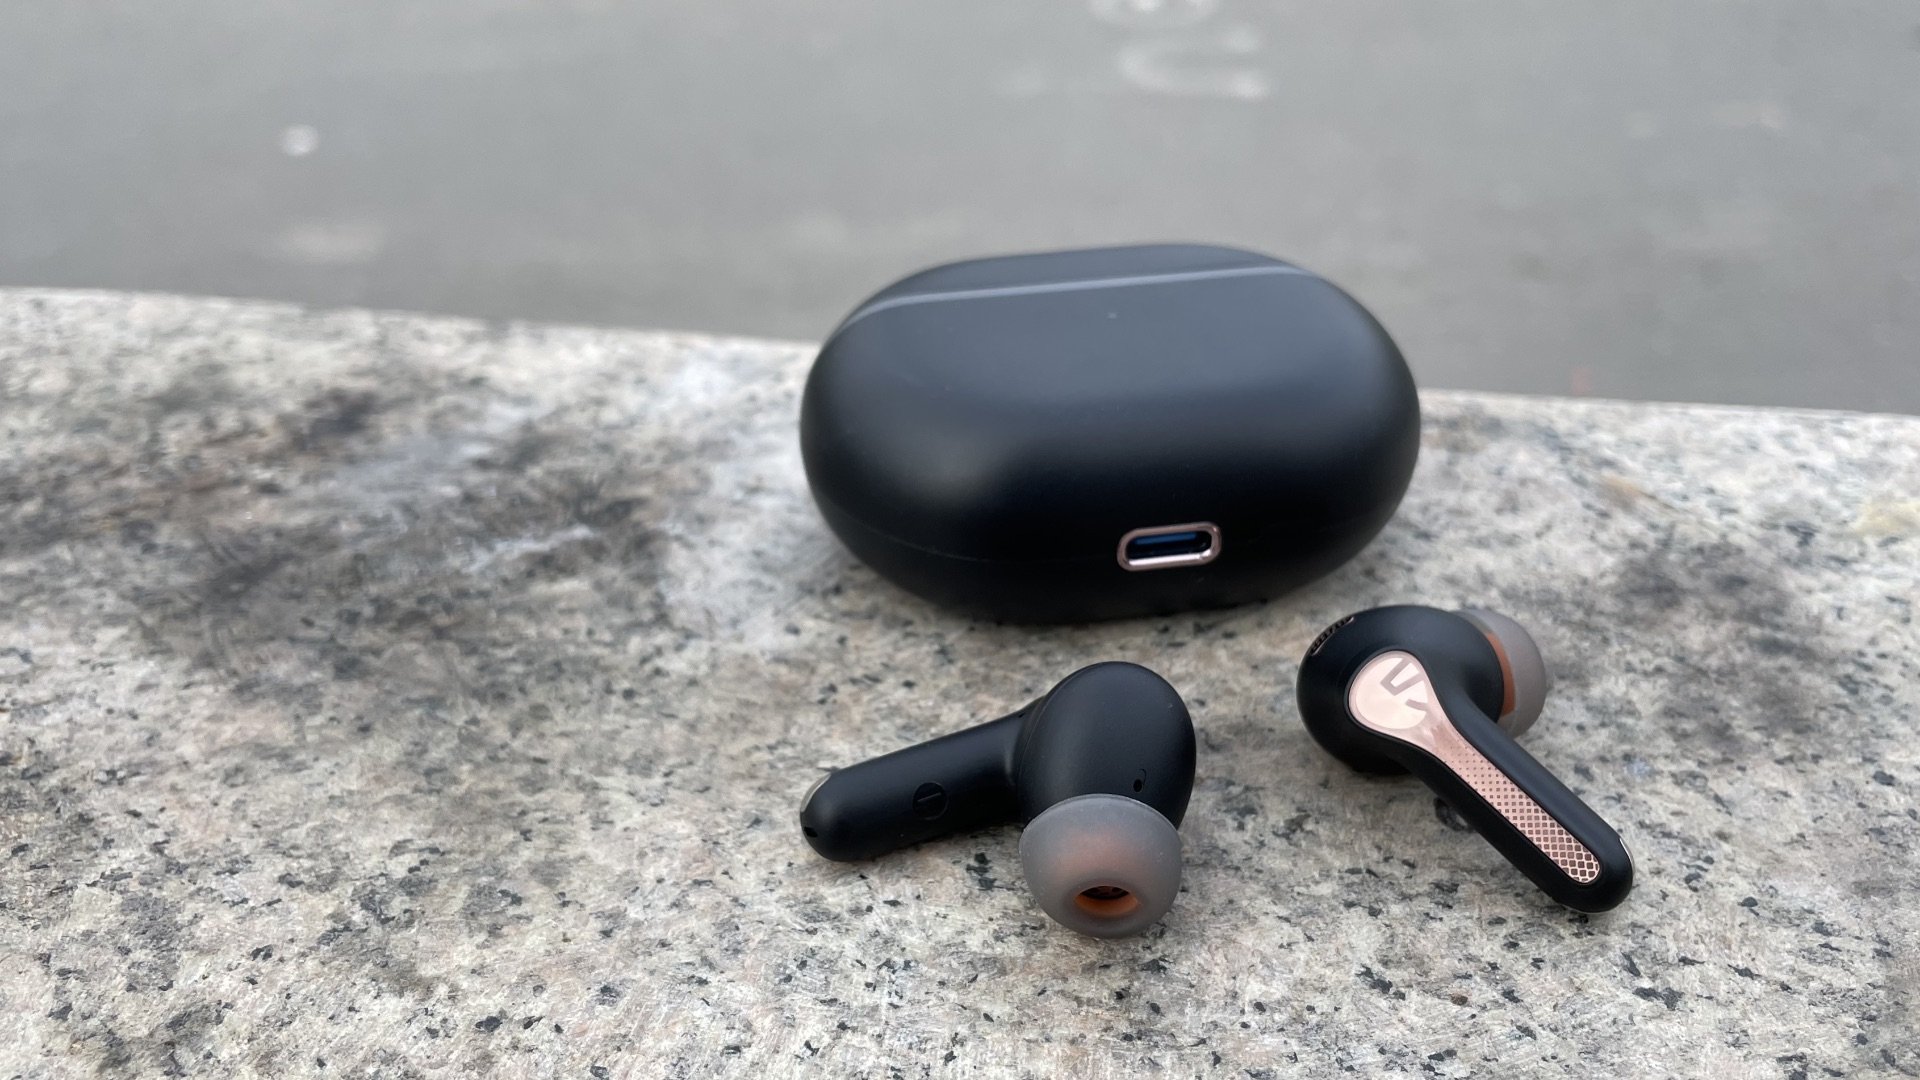 MEGA TEST: Which are the best SoundPEATS earbuds?